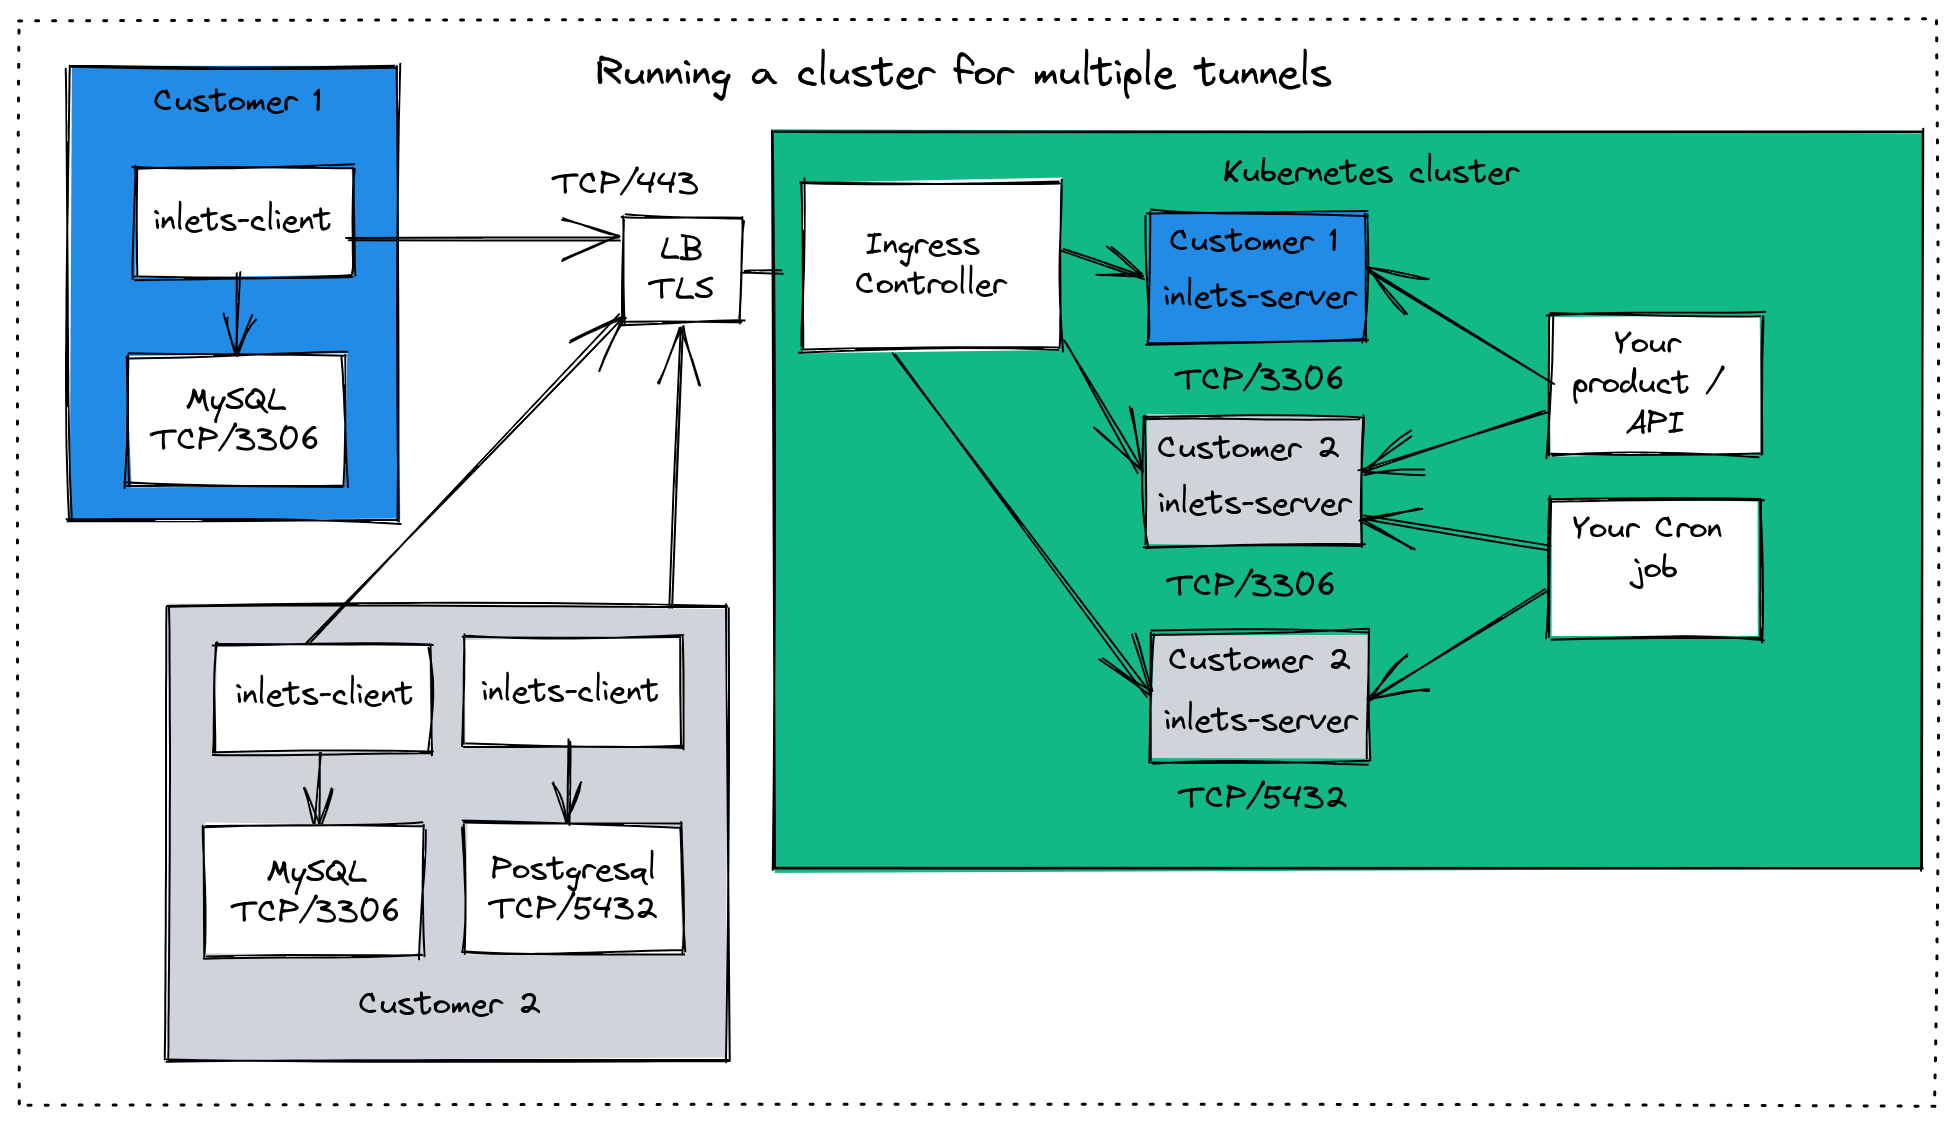 A cluster for multiple tunnels